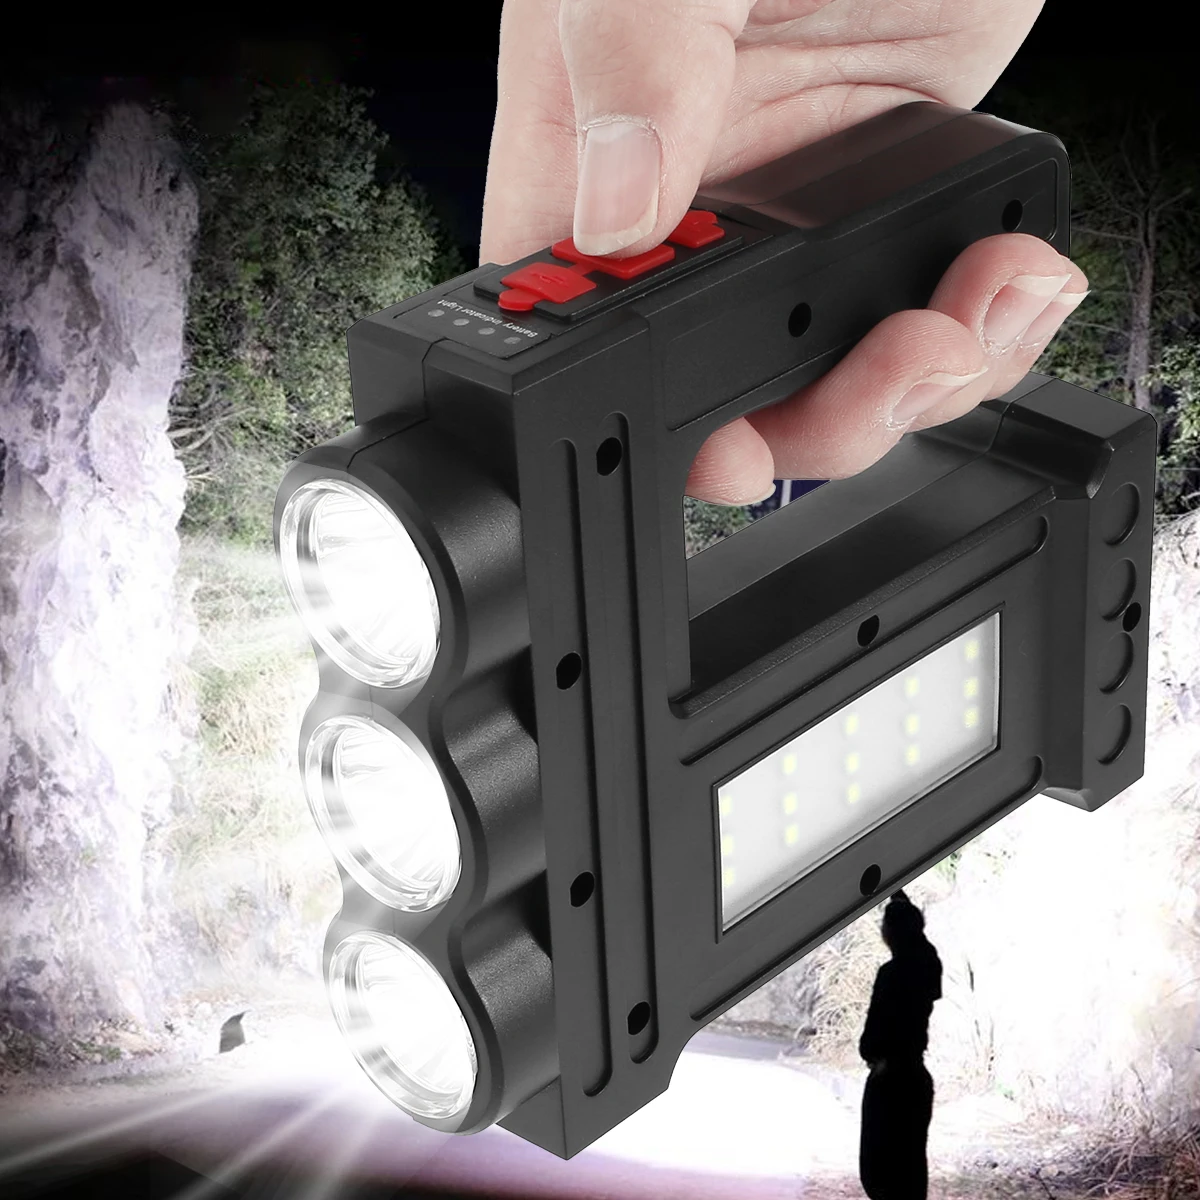 

Portable LED Flashlight Hand-held Spotlight Torch Lantern USB Rechargeable Searchlight Outdoor Camping Mountaineering Tent Light